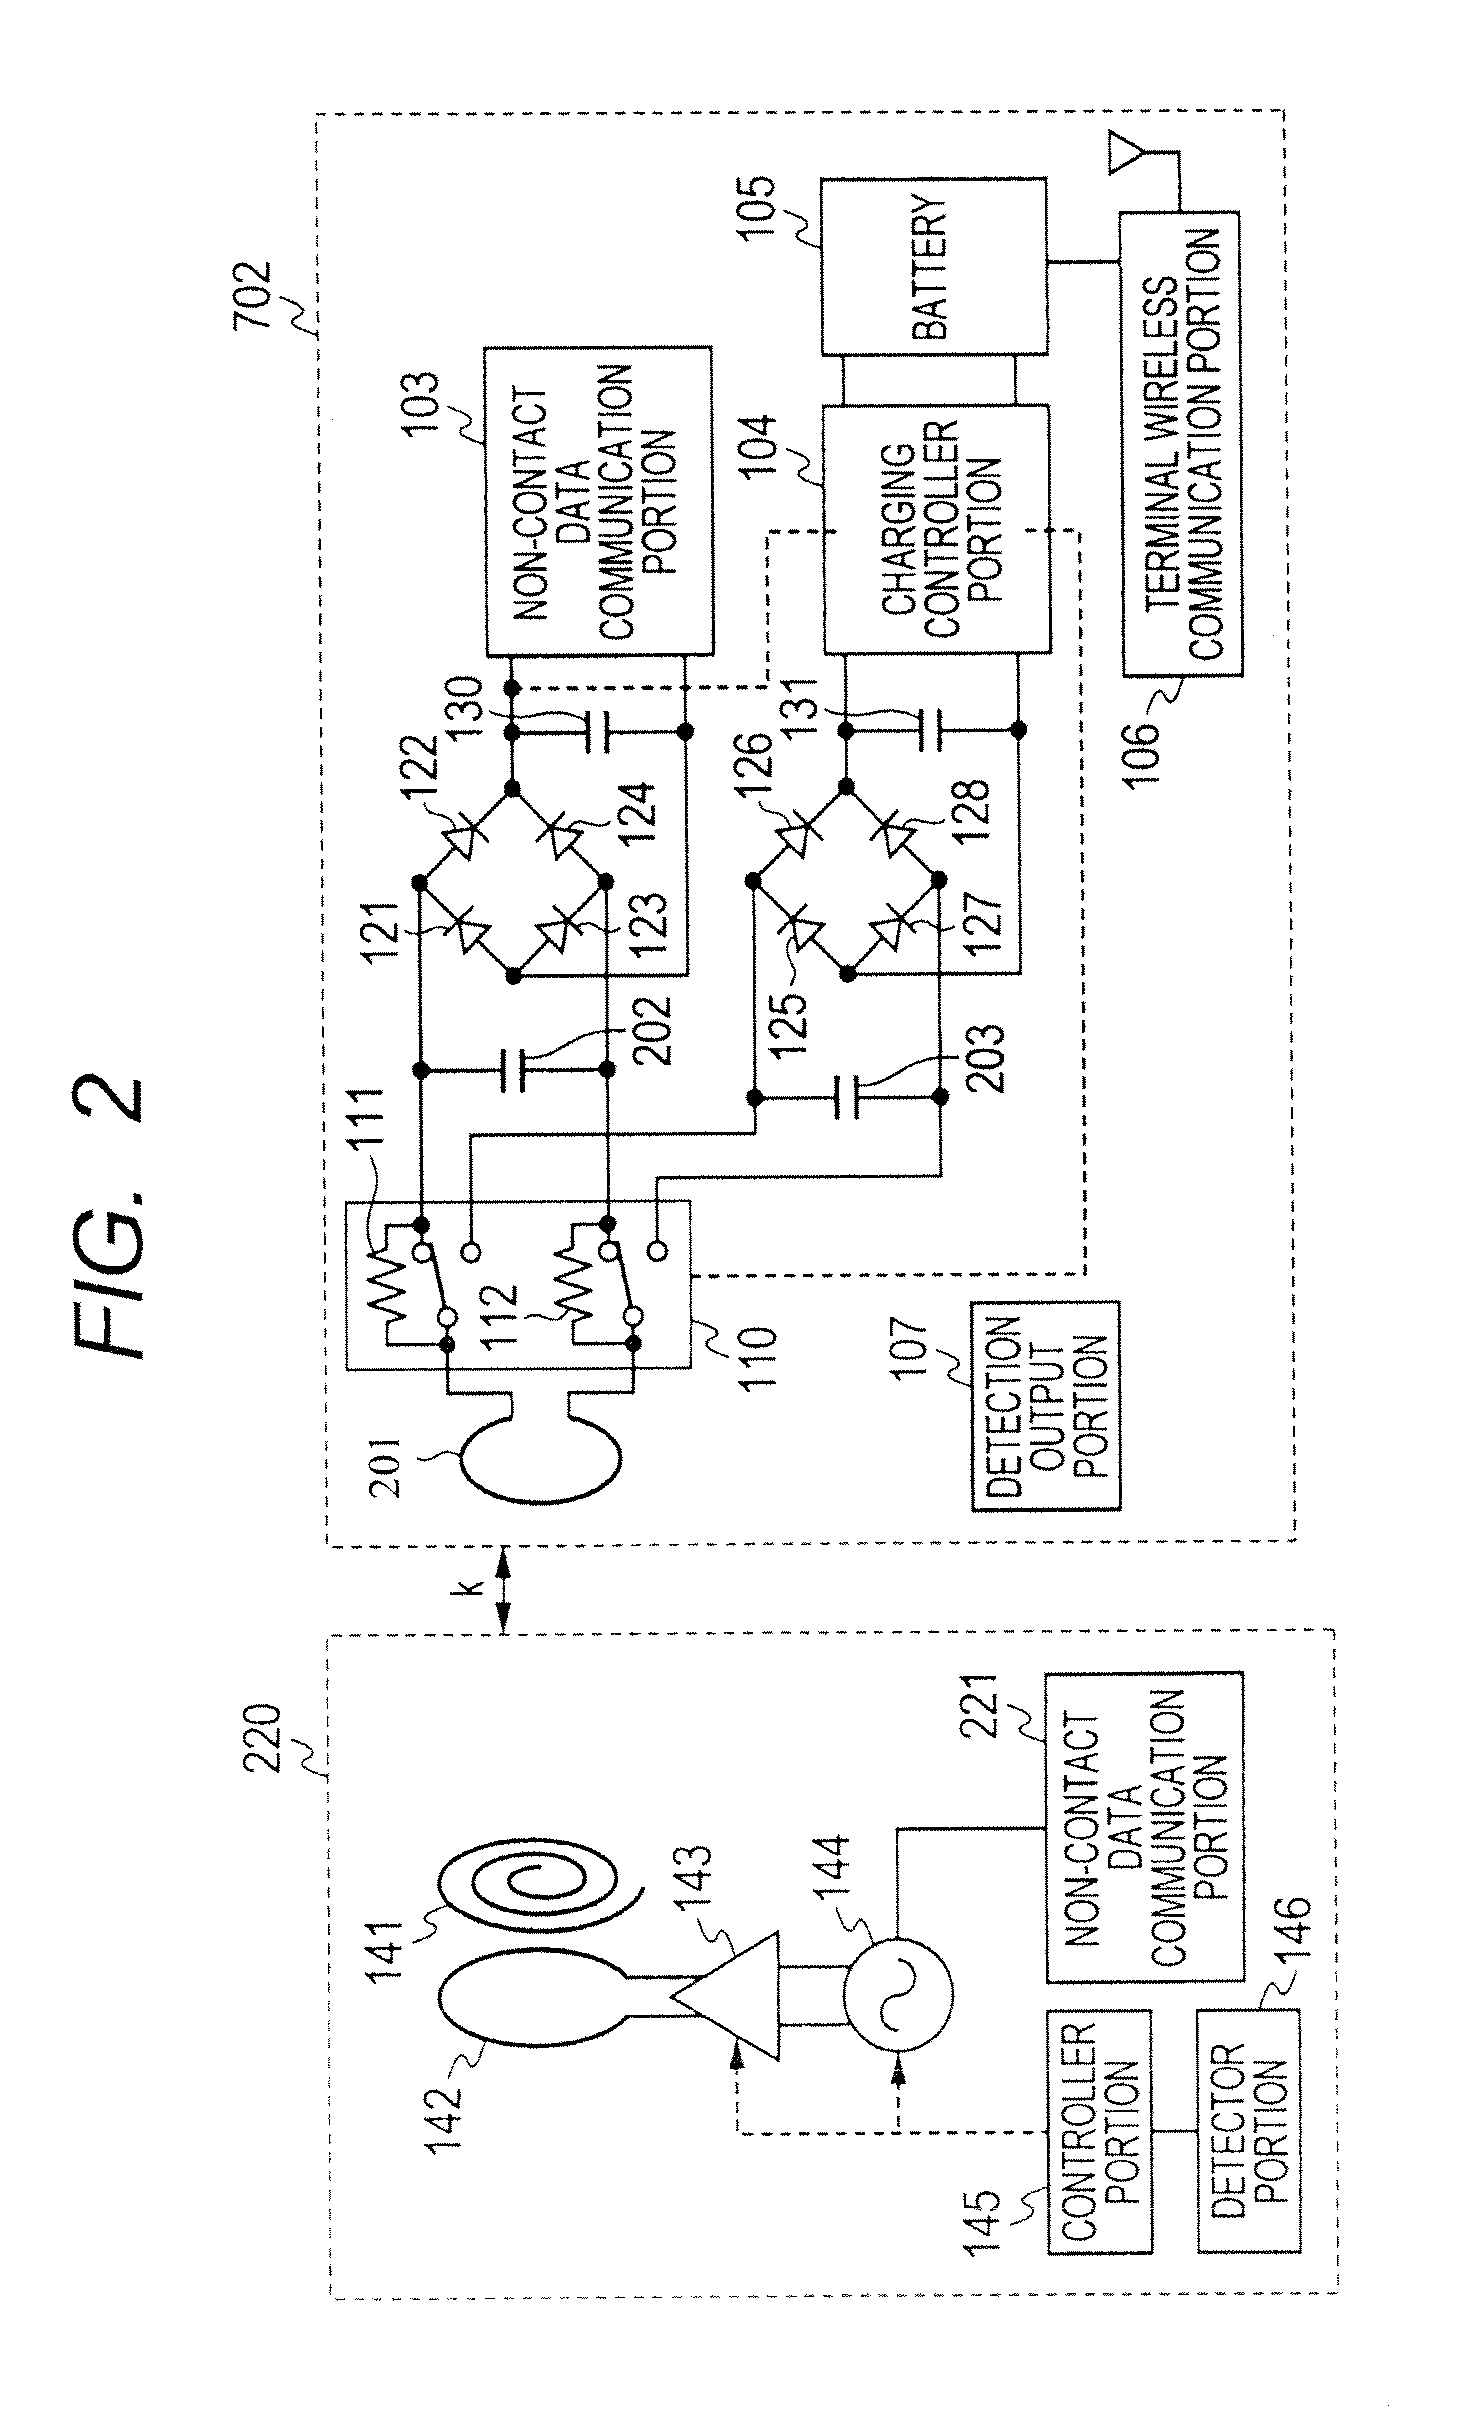 Non-contact power transmission system, receiving apparatus and transmitting apparatus